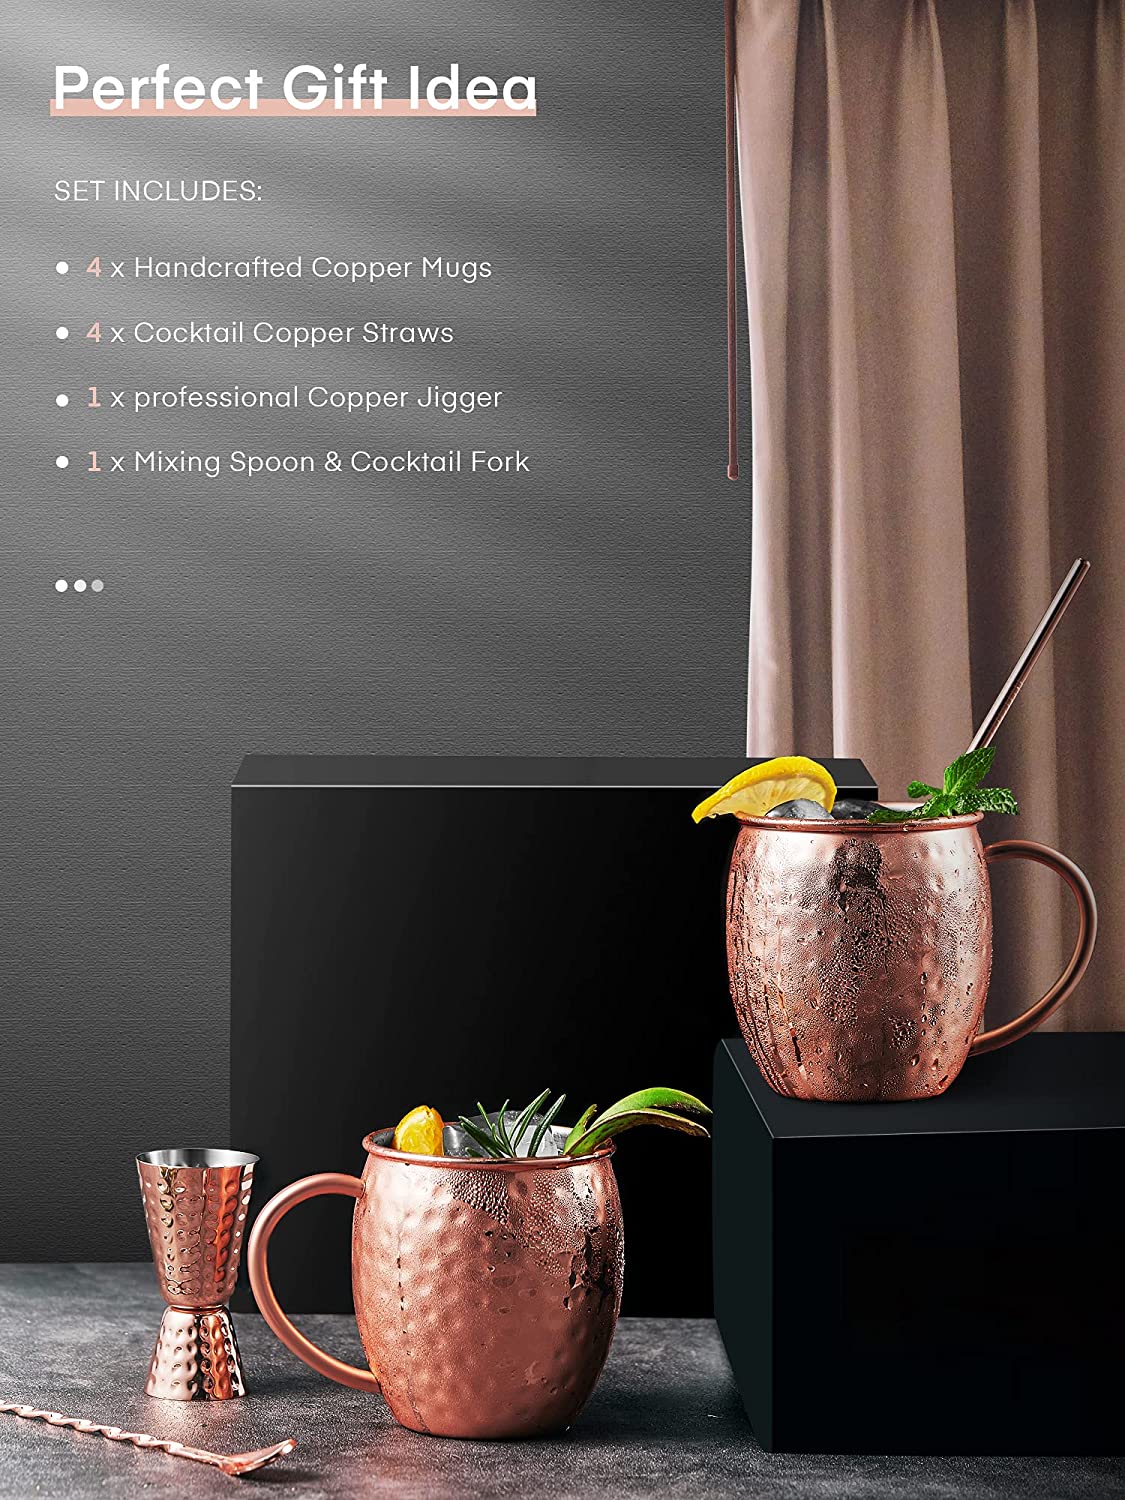 Moscow Mule Mugs, Set of 4 Hammered Moscow Mule Copper Mugs, Food Grade Stainless Steel Lining, 18 oz Gift Set Copper Mugs with 4 Straws, 1 Double-Jigger, 2-in-1 Bar Stirring Spoon Fork